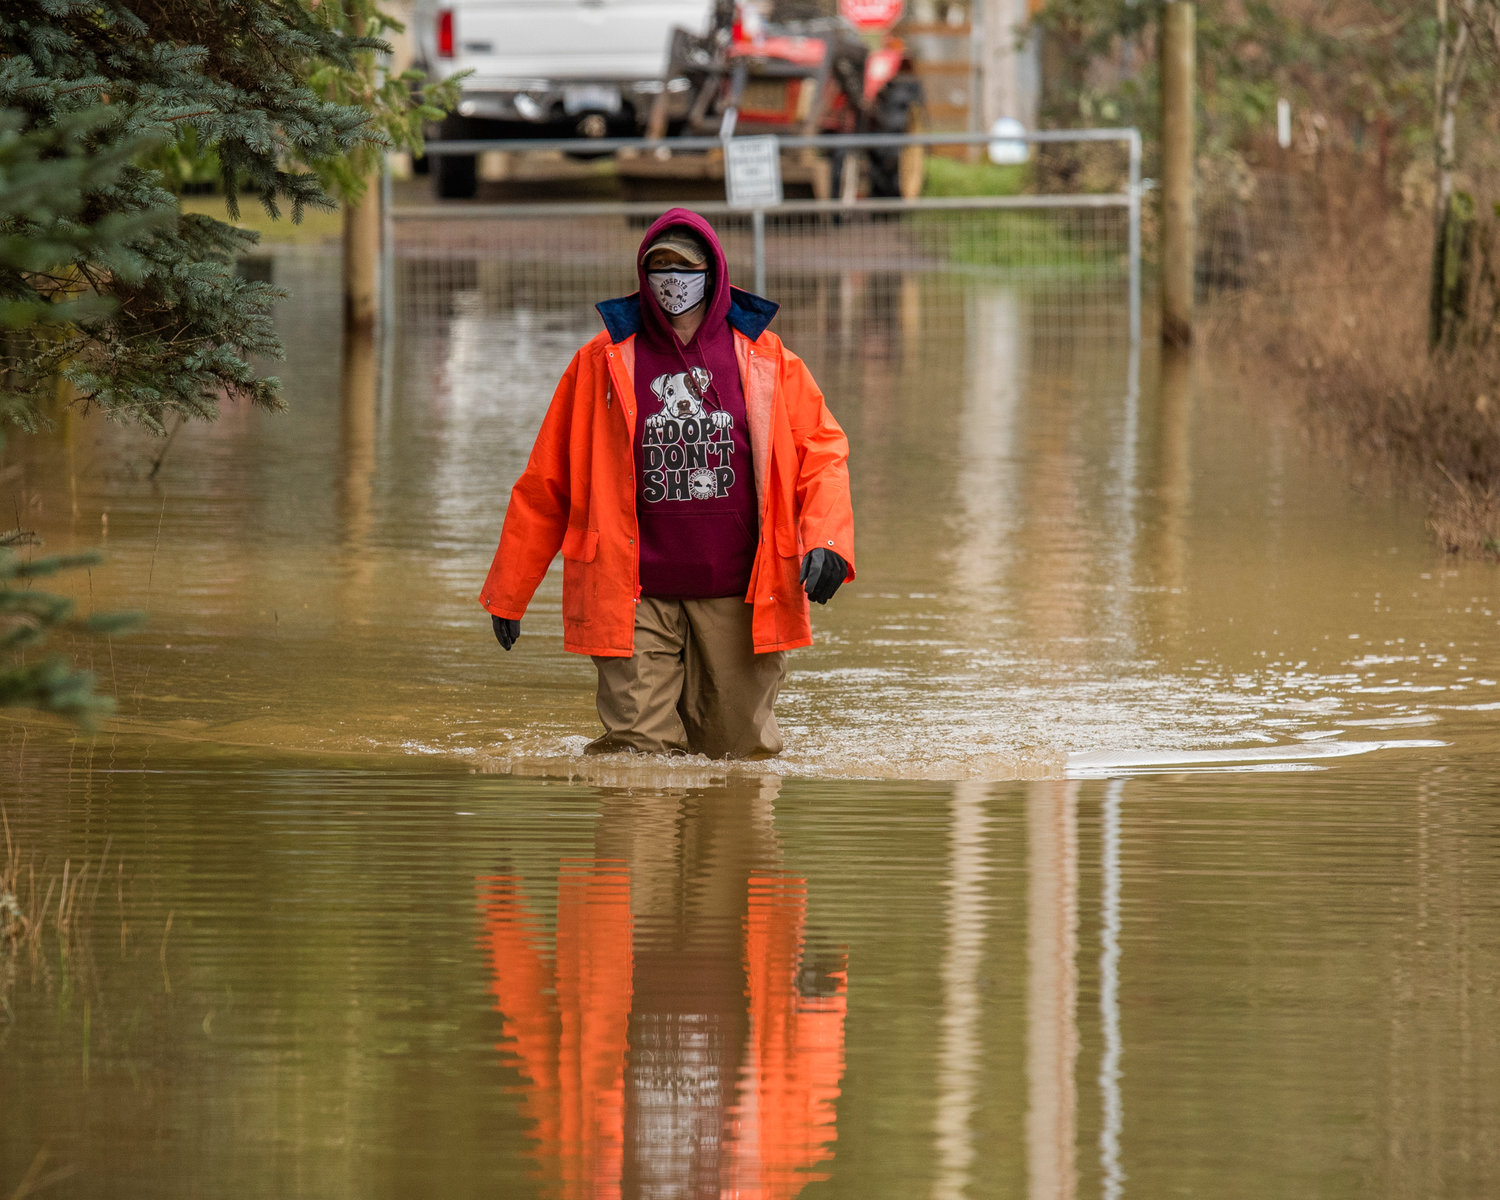 Misspits Rescue owner and founder Melissa Nolan, who lives along the Black River, walks through flood water Monday.